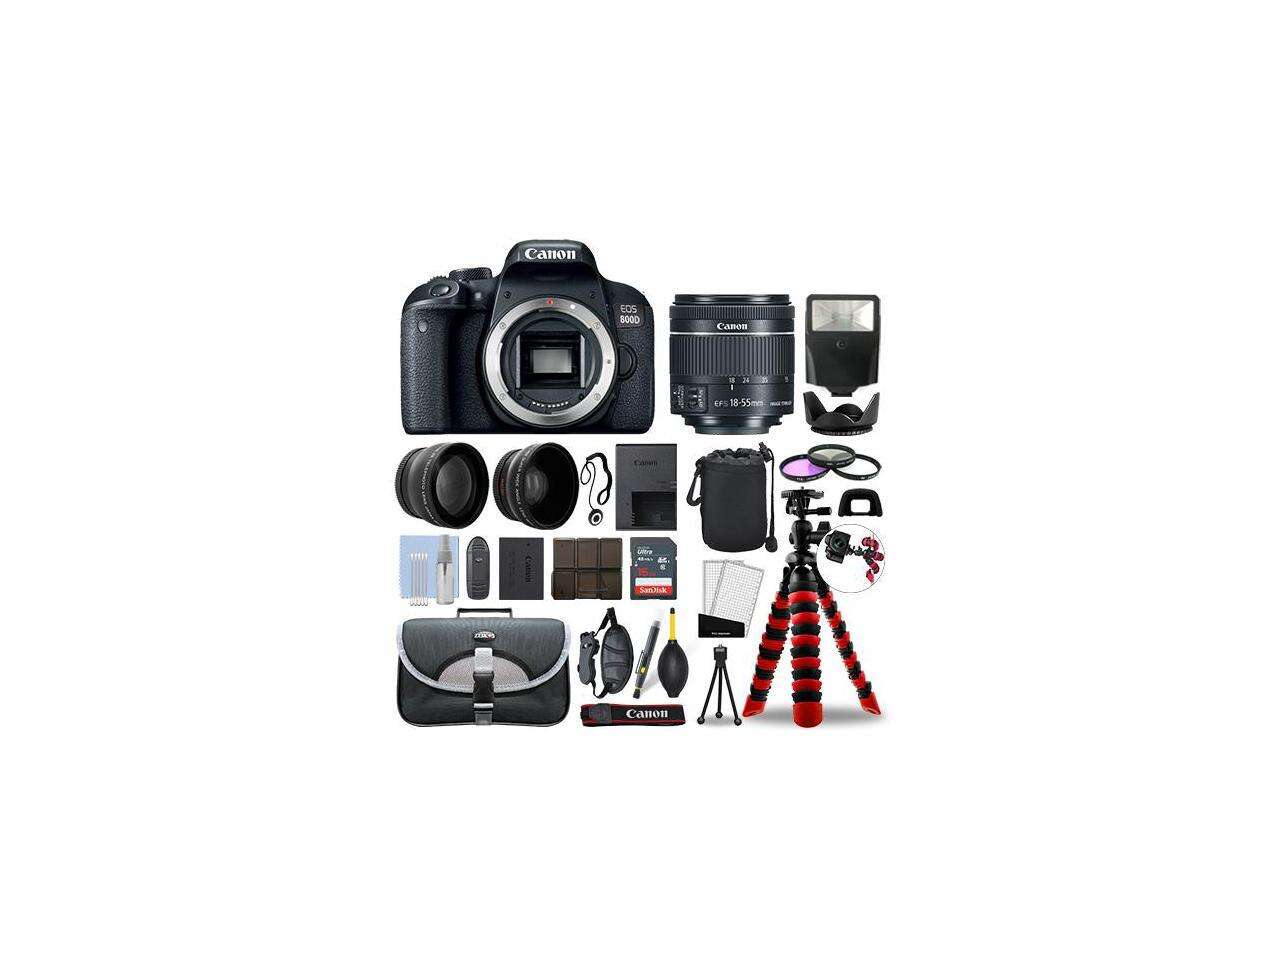 Canon 800D / T7i SLR Camera with 18-55mm STM+ 16GB 3 Lens Ultimate Accessory Kit